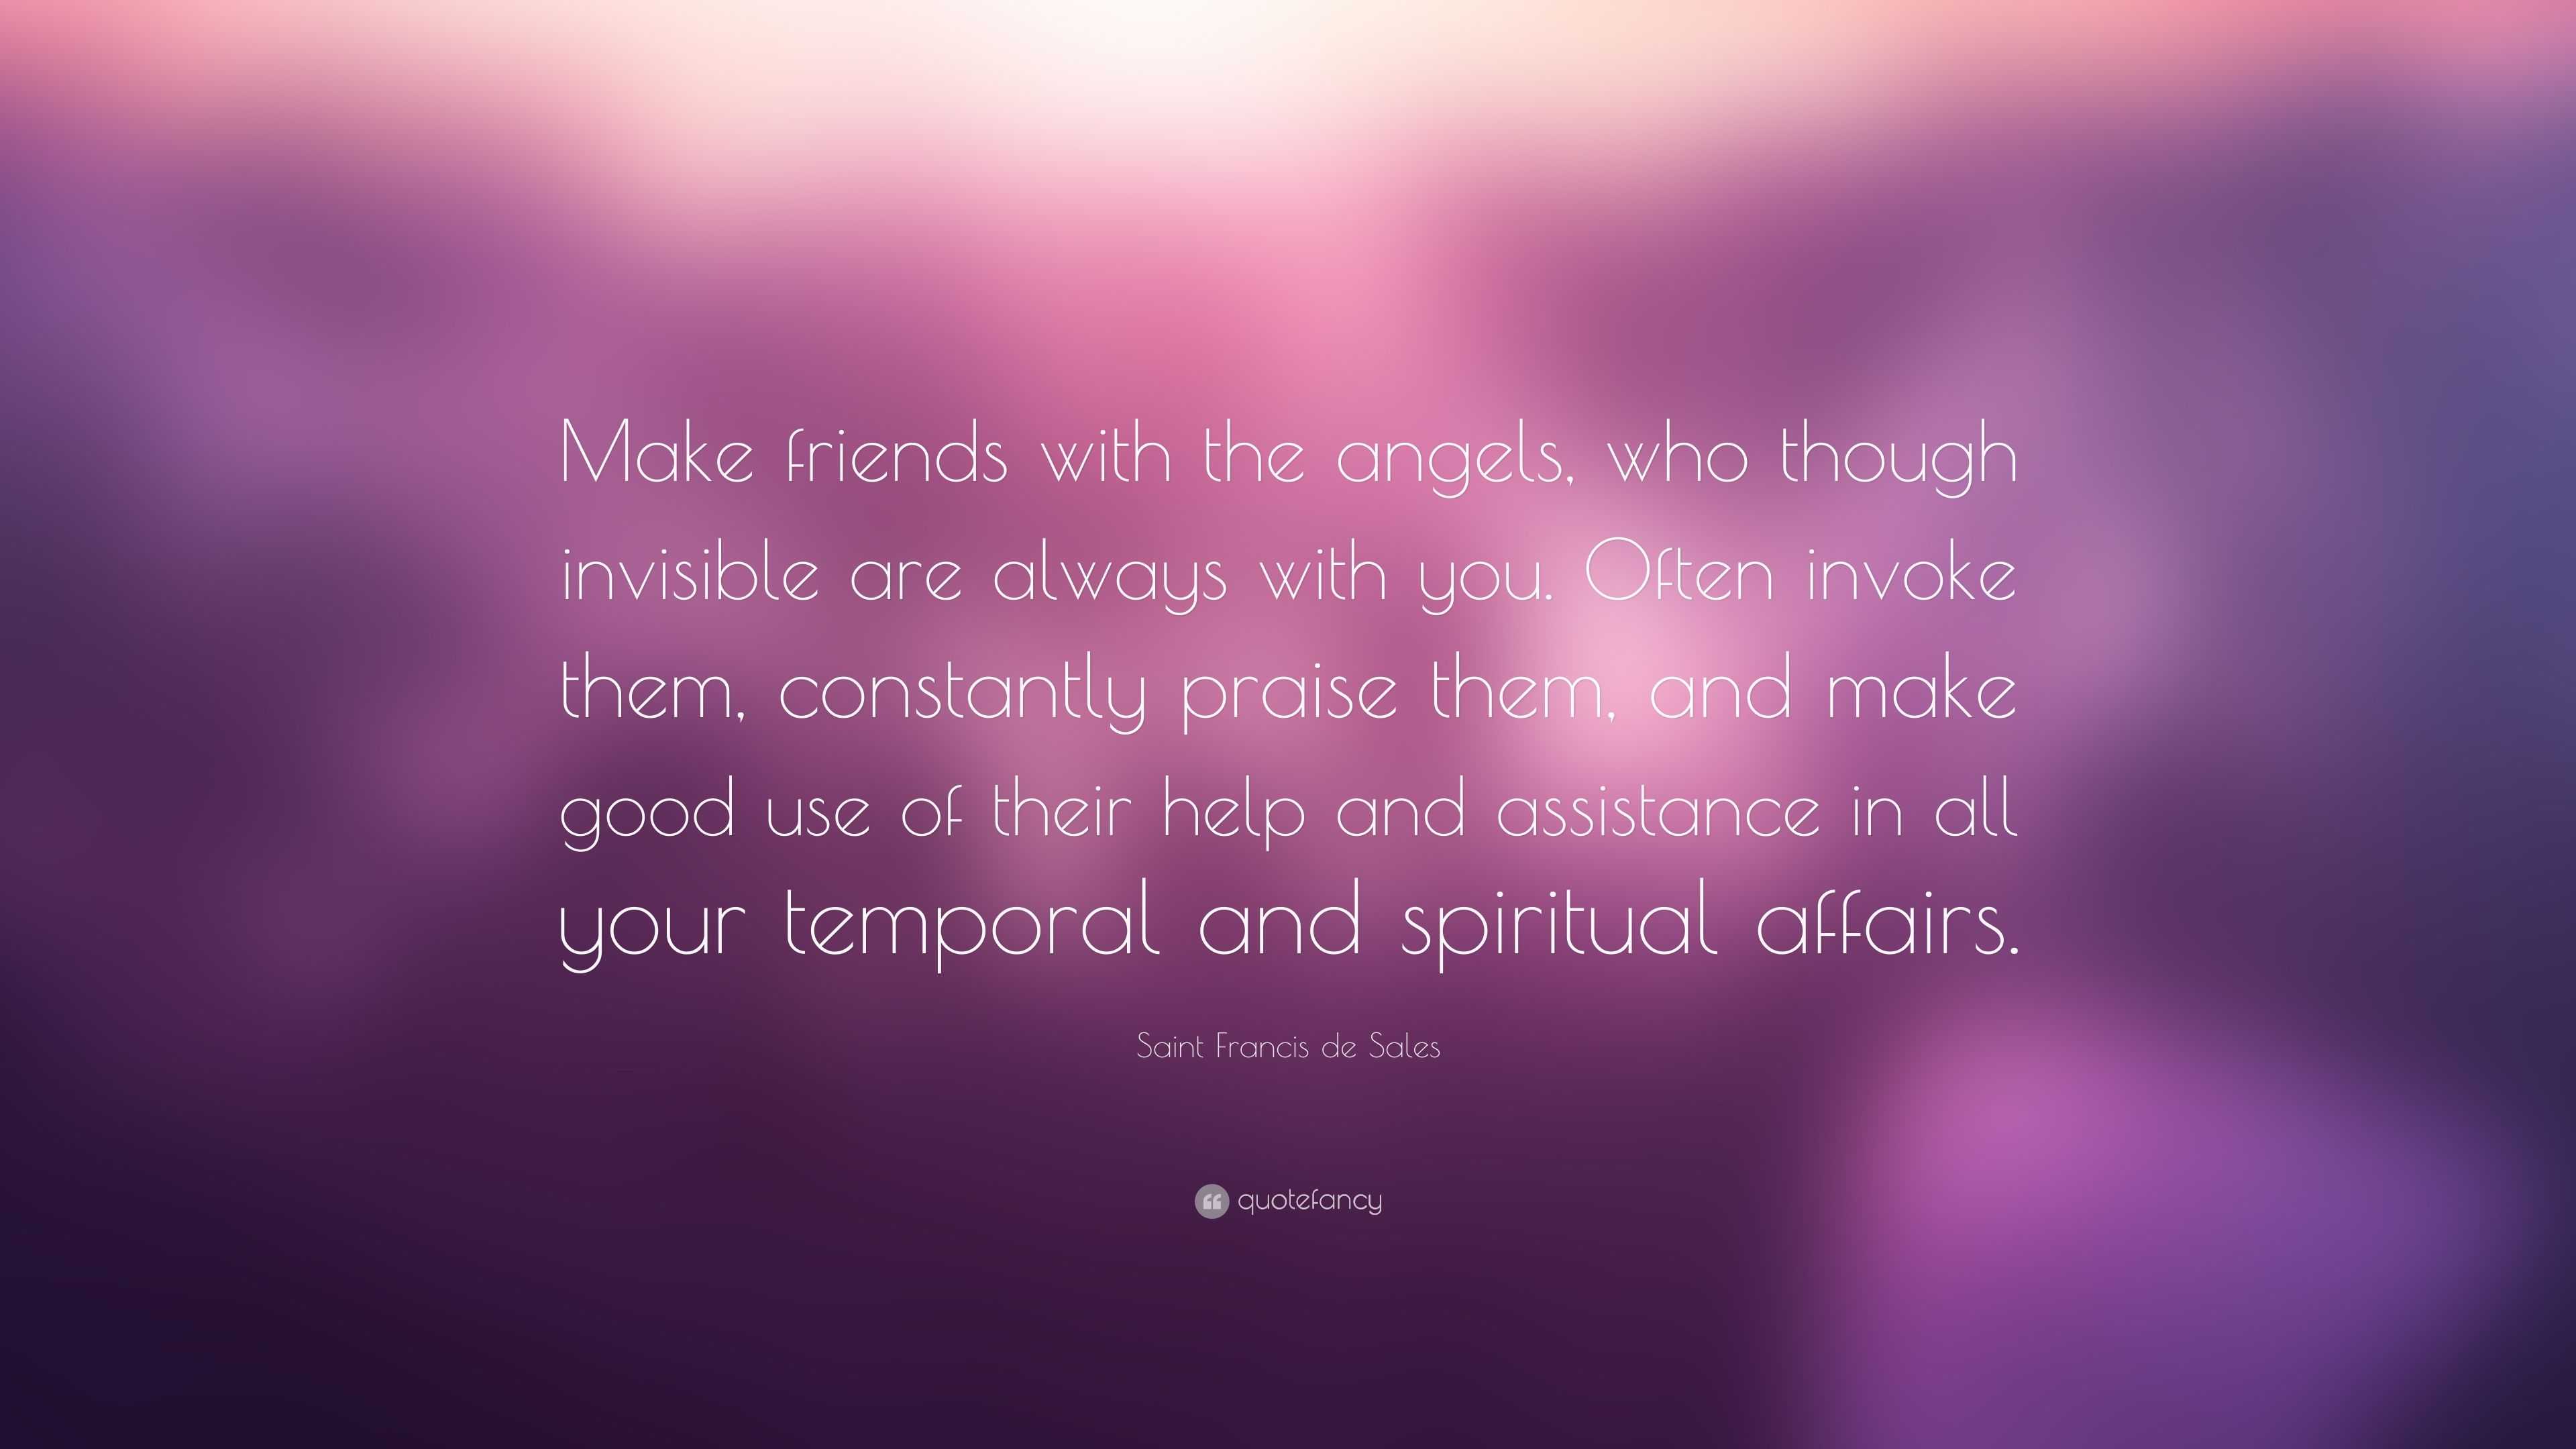 Saint Francis de Sales Quote: “Make friends with the angels, who though ...